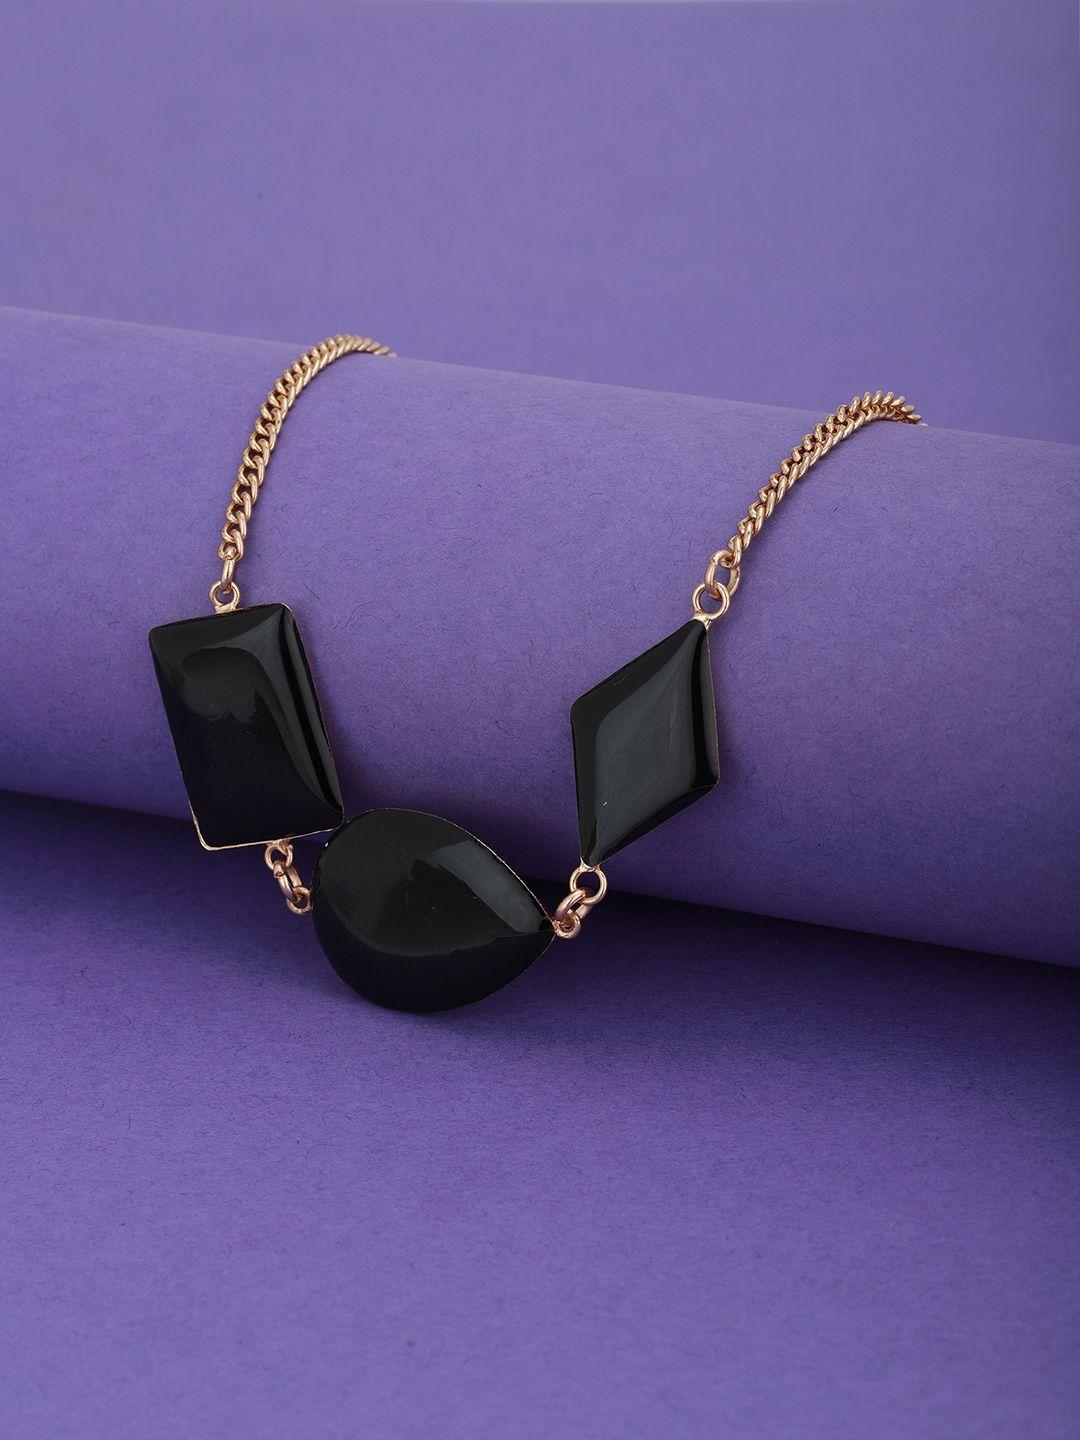 carlton london black gold-plated enamelled necklace